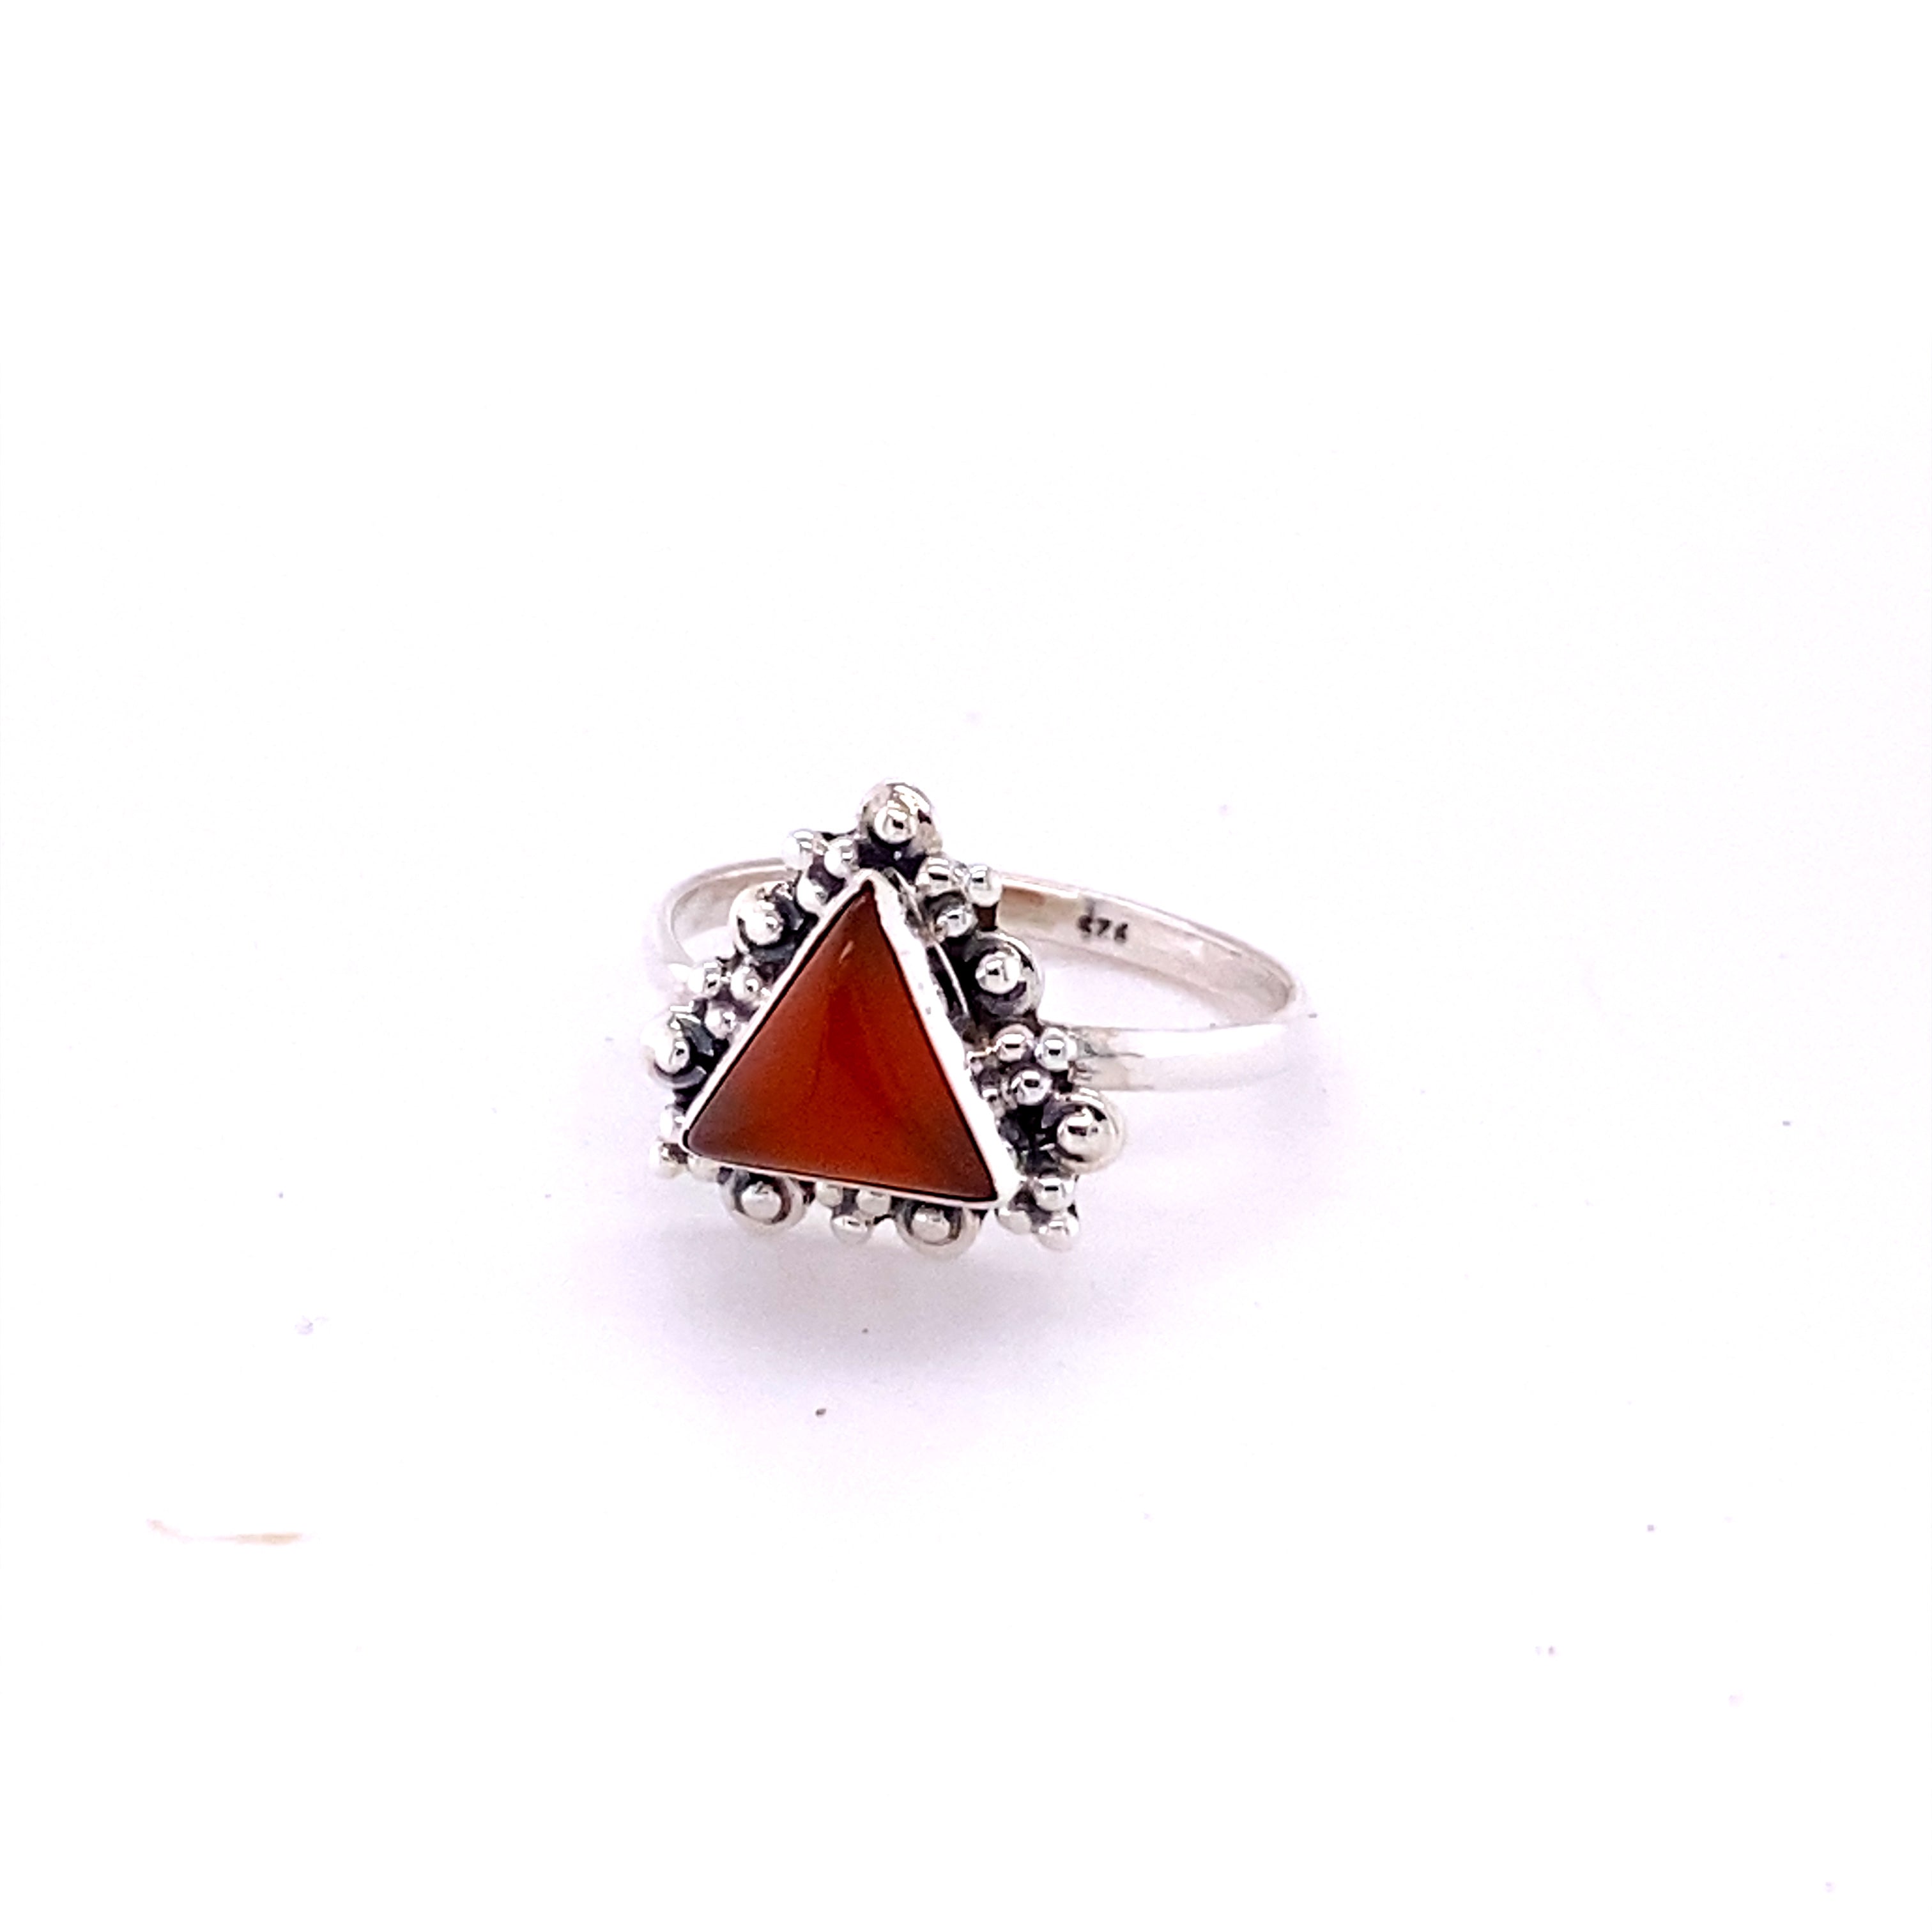 Buy Red Triangle Stone Online In India - Etsy India